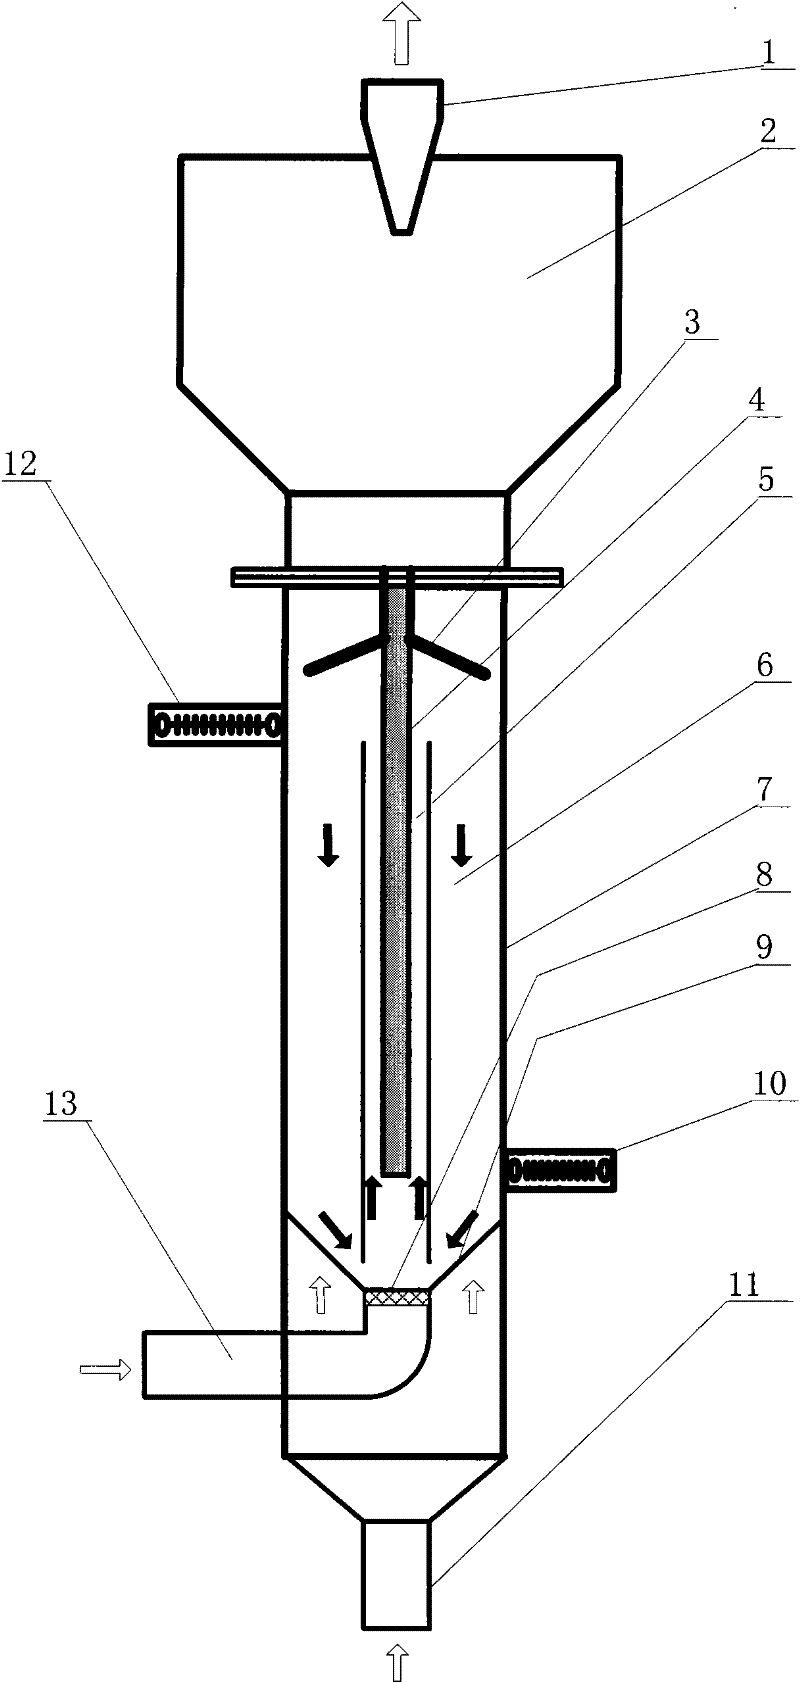 Spouted bed reactor and method thereof for synthesizing chlorinated polyvinyl chloride by using low-temperature plasmas